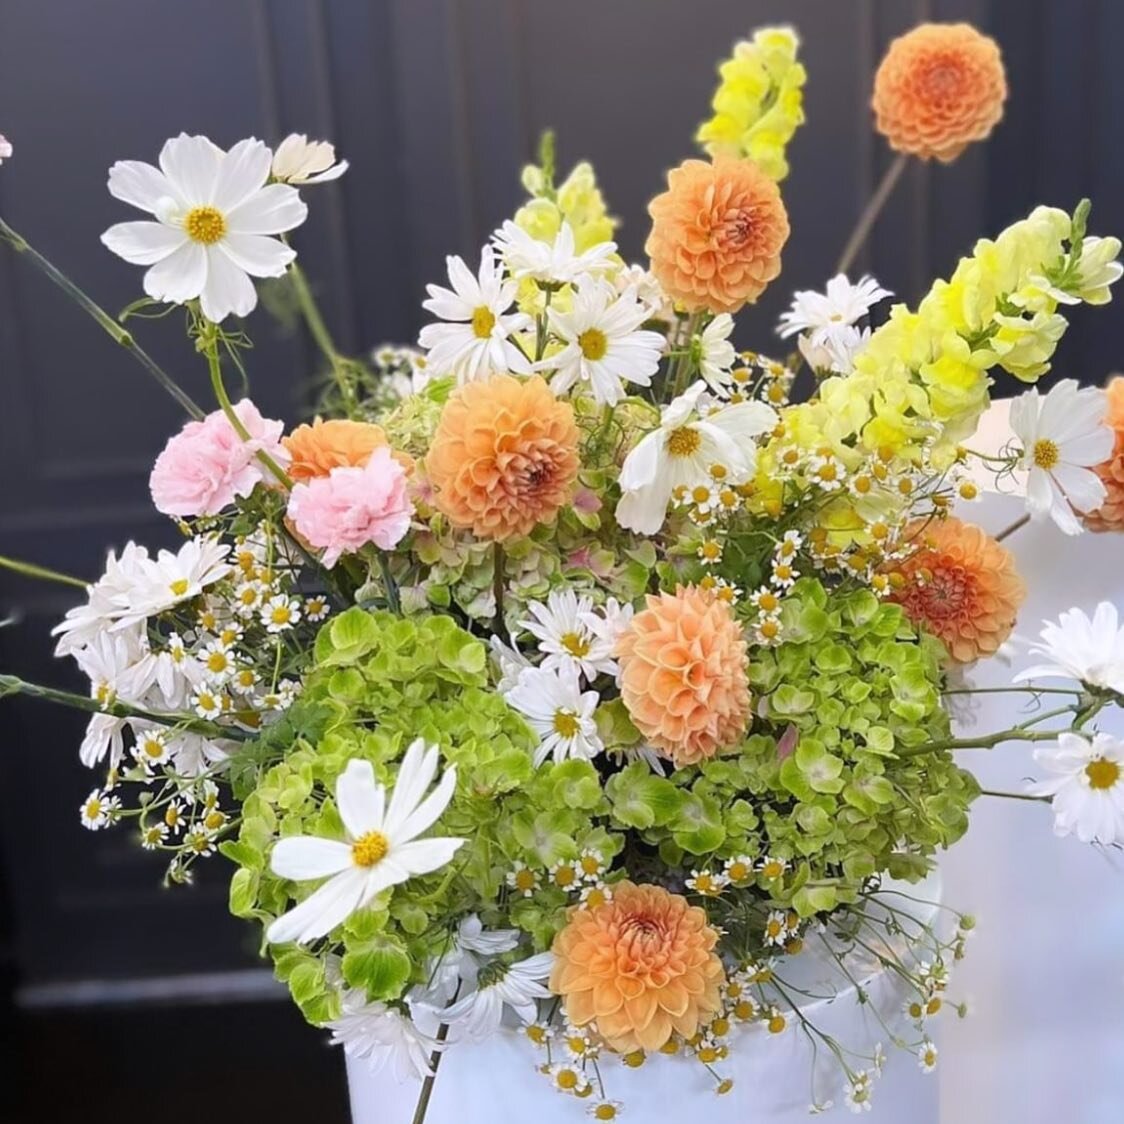 Statement pieces 🌸

Turn heads at your next gathering, event or celebration with a showcase piece that brightens the space! 

Talk to me about creating the wow today:

https://www.flowerswithtika.com.au

#newcastleflorist #huntervalleyflorist #maitl